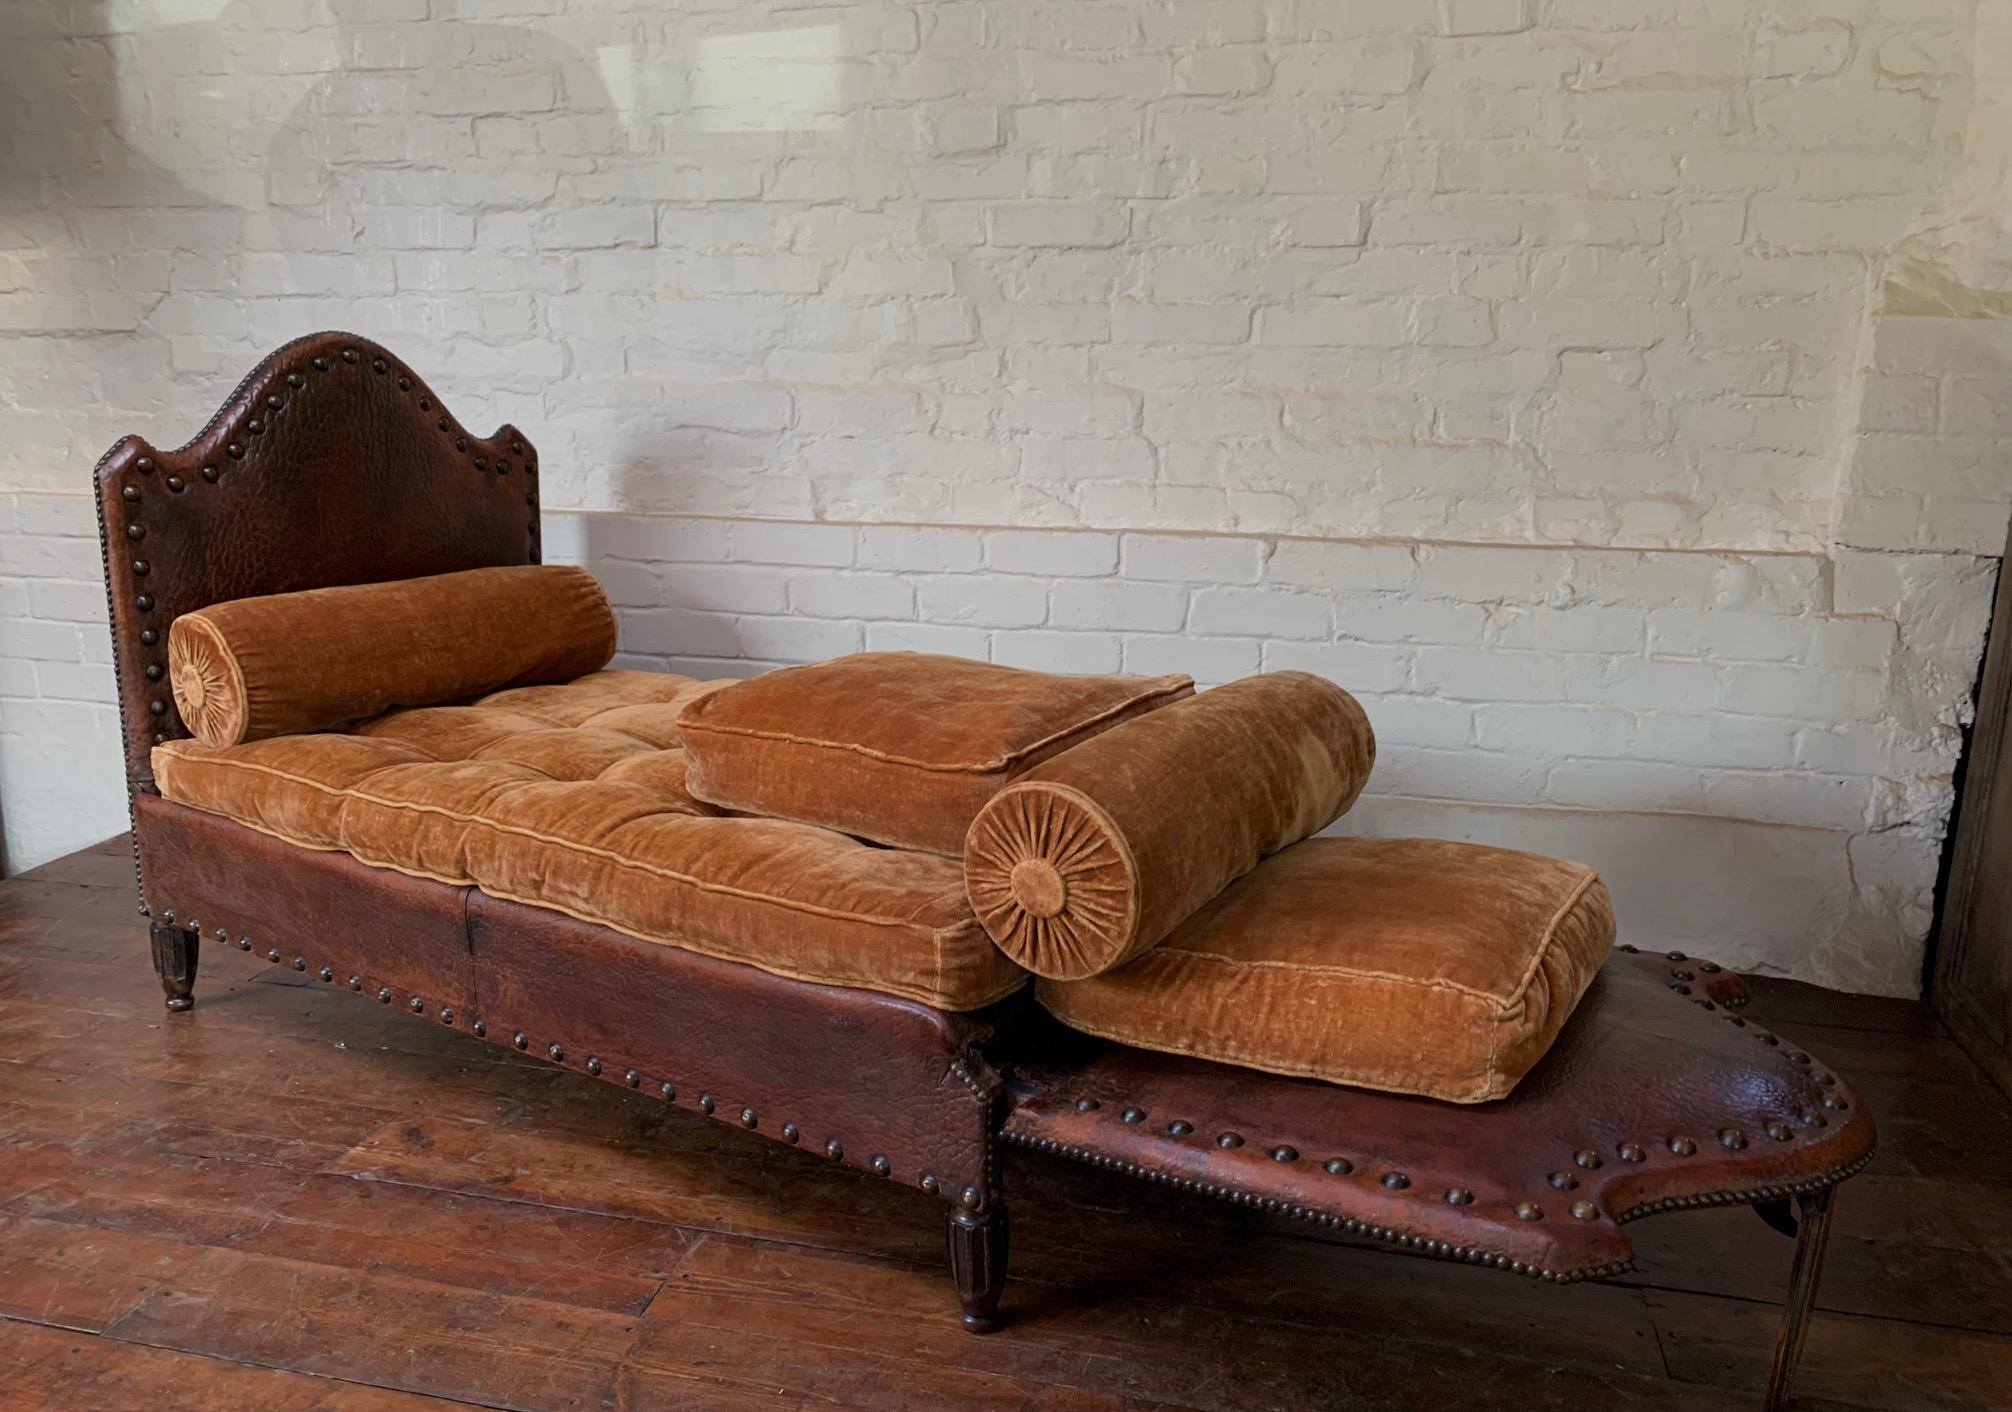 Art Deco An Exquisite and Rare French Leather Daybed Completely Original, Circa 1920's For Sale